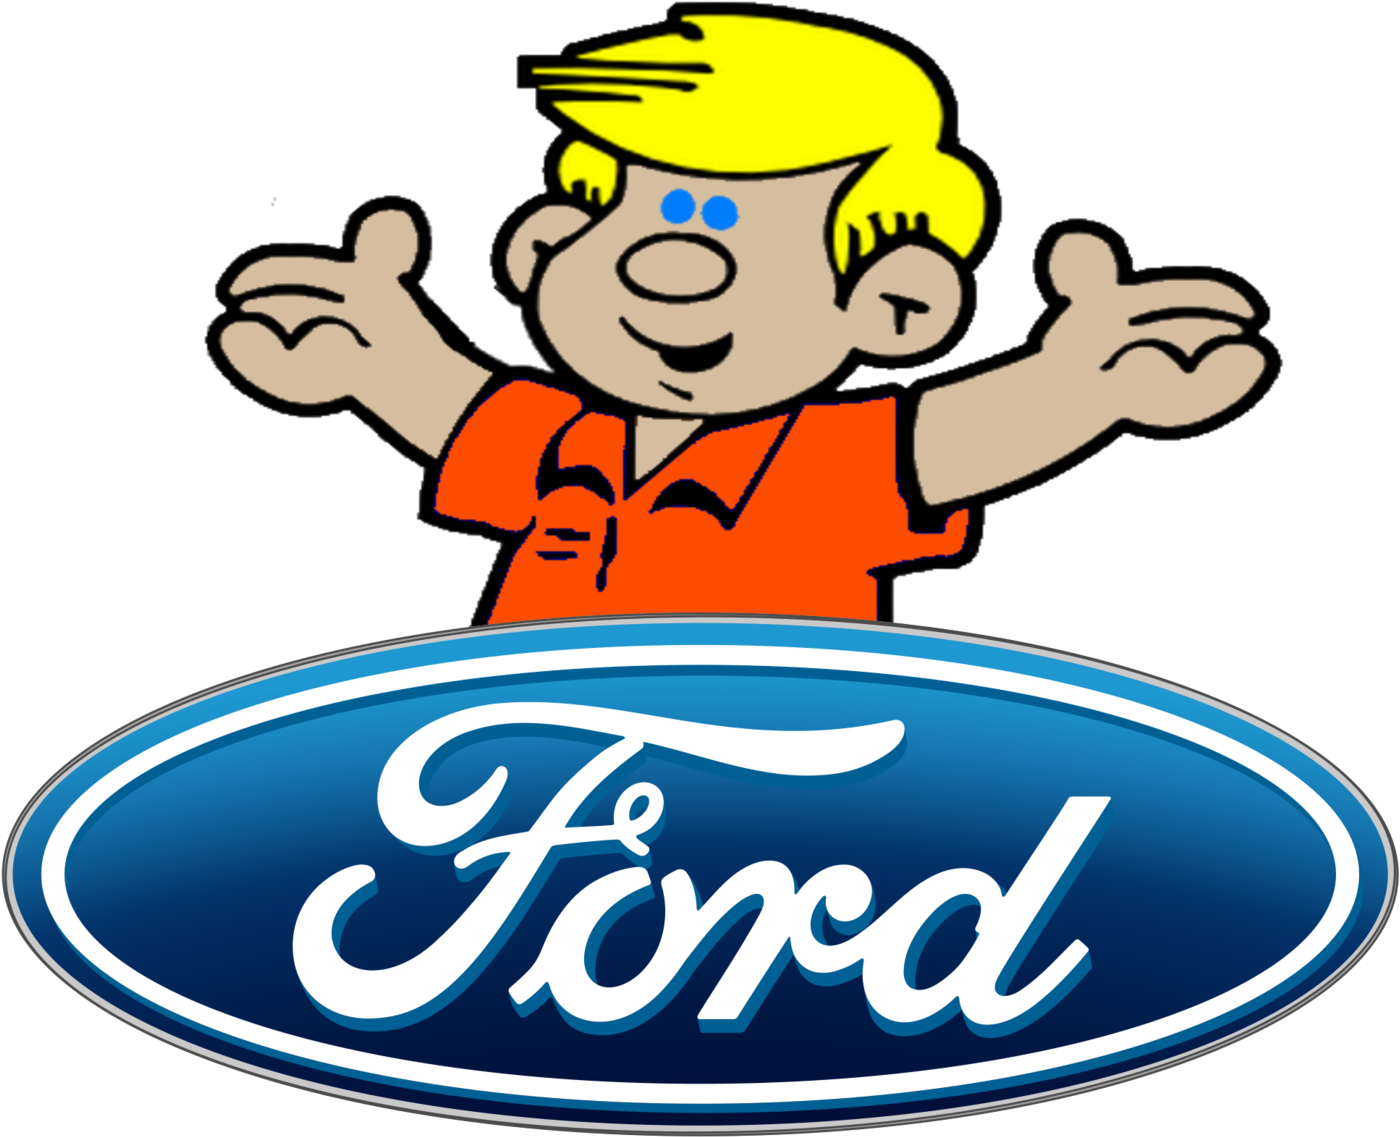 Frenchie's Ford, Inc - Ford Motor Company (1461x1200)